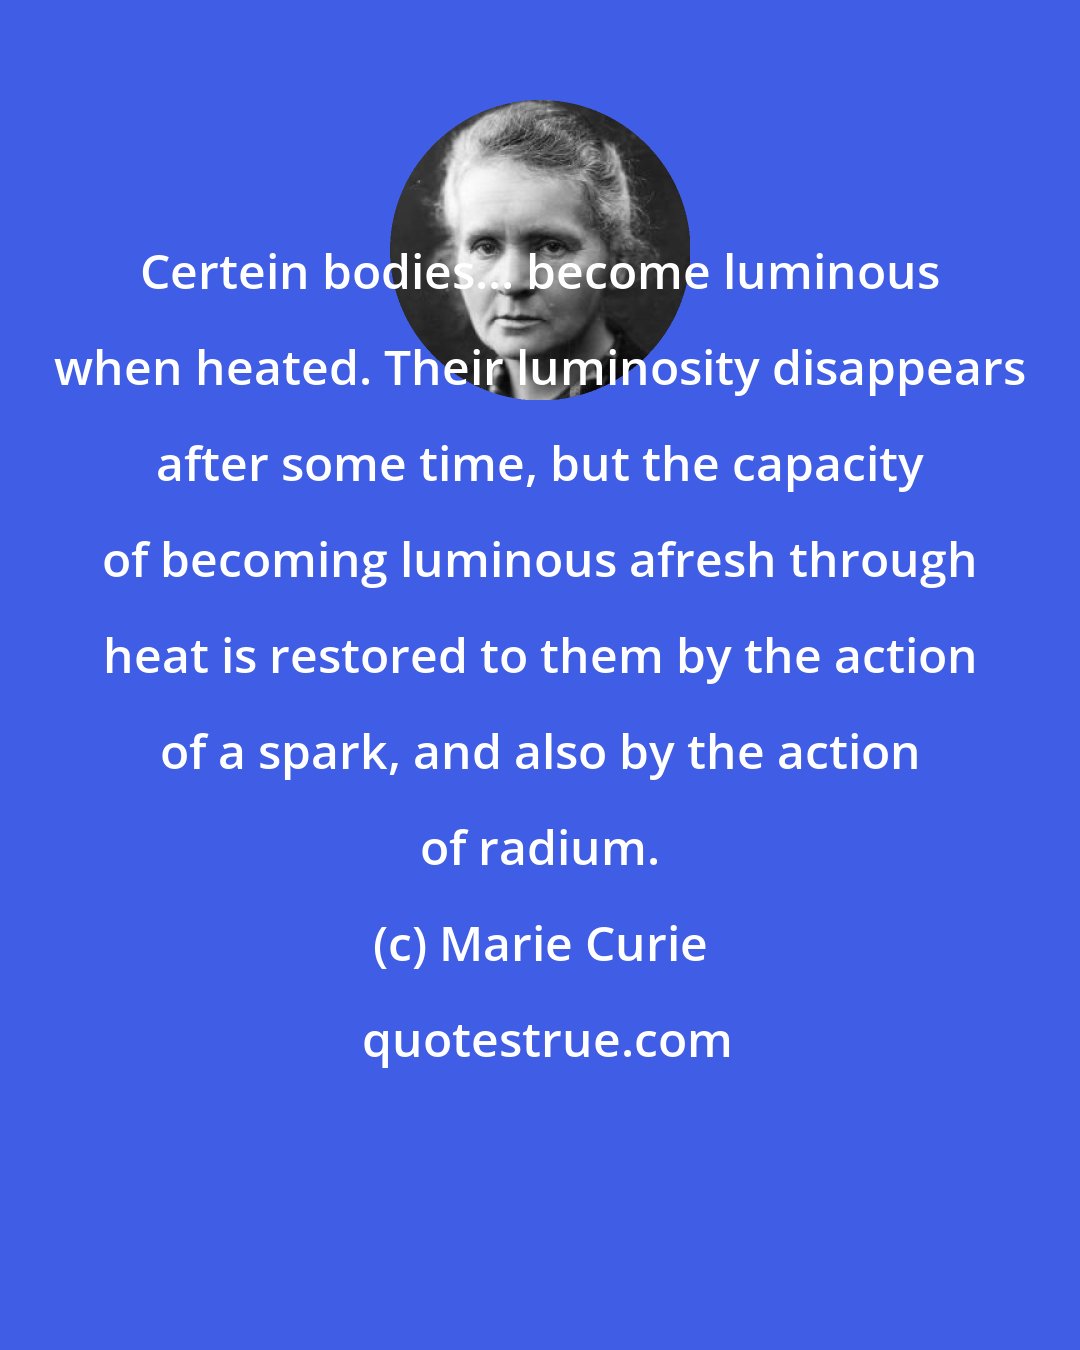 Marie Curie: Certein bodies... become luminous when heated. Their luminosity disappears after some time, but the capacity of becoming luminous afresh through heat is restored to them by the action of a spark, and also by the action of radium.